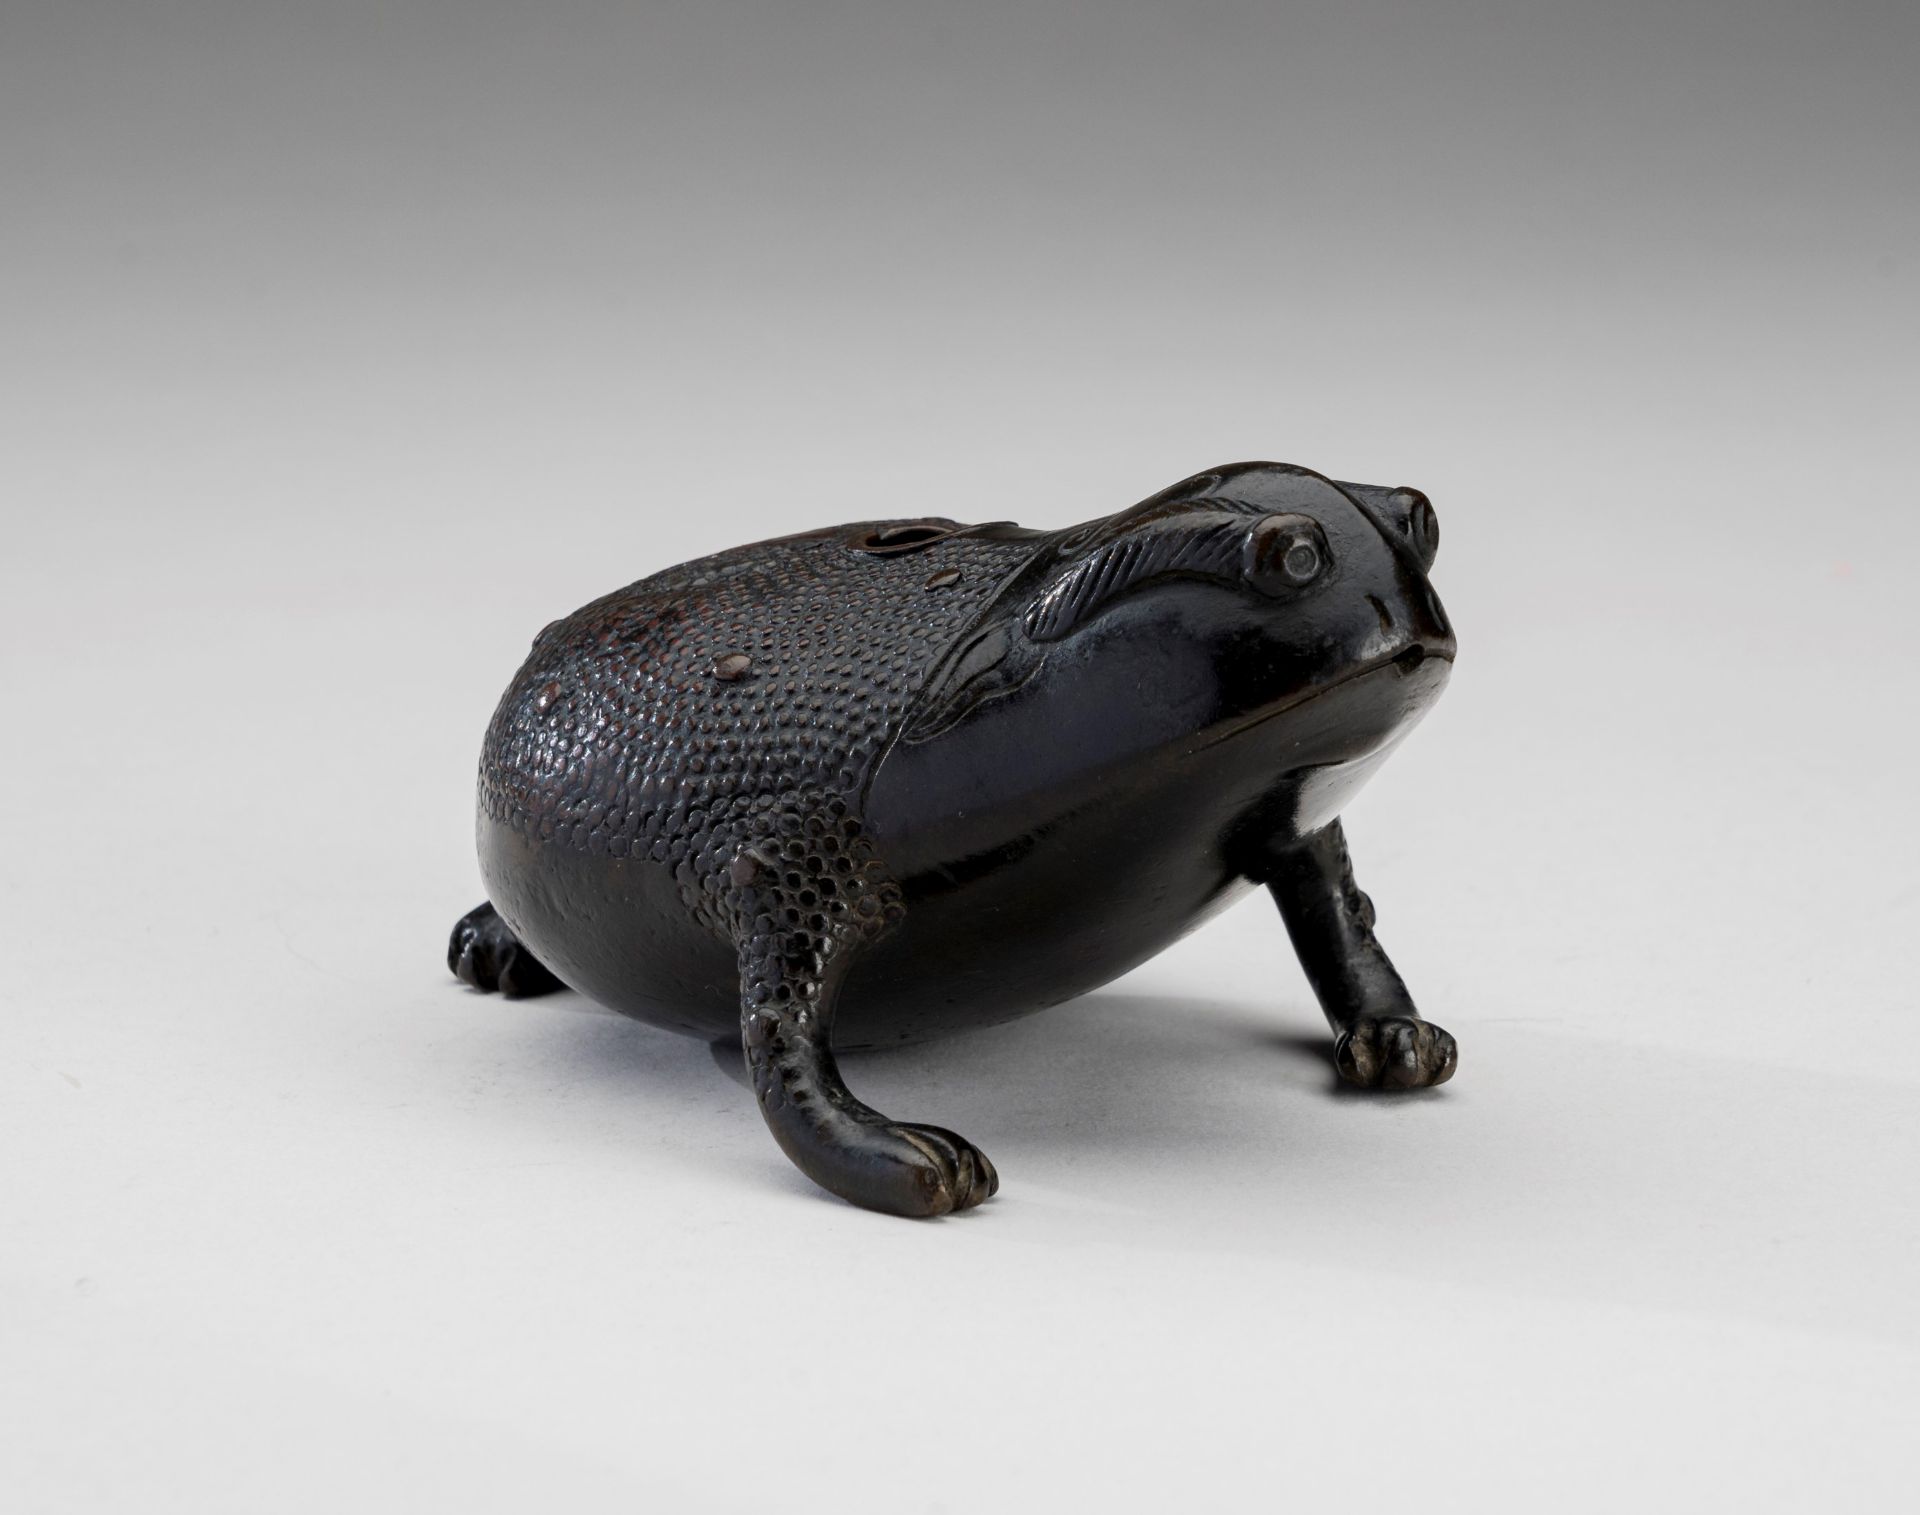 A BRONZE WATER DROPPER IN THE SHAPE OF GAMA SENNIN'S TOAD